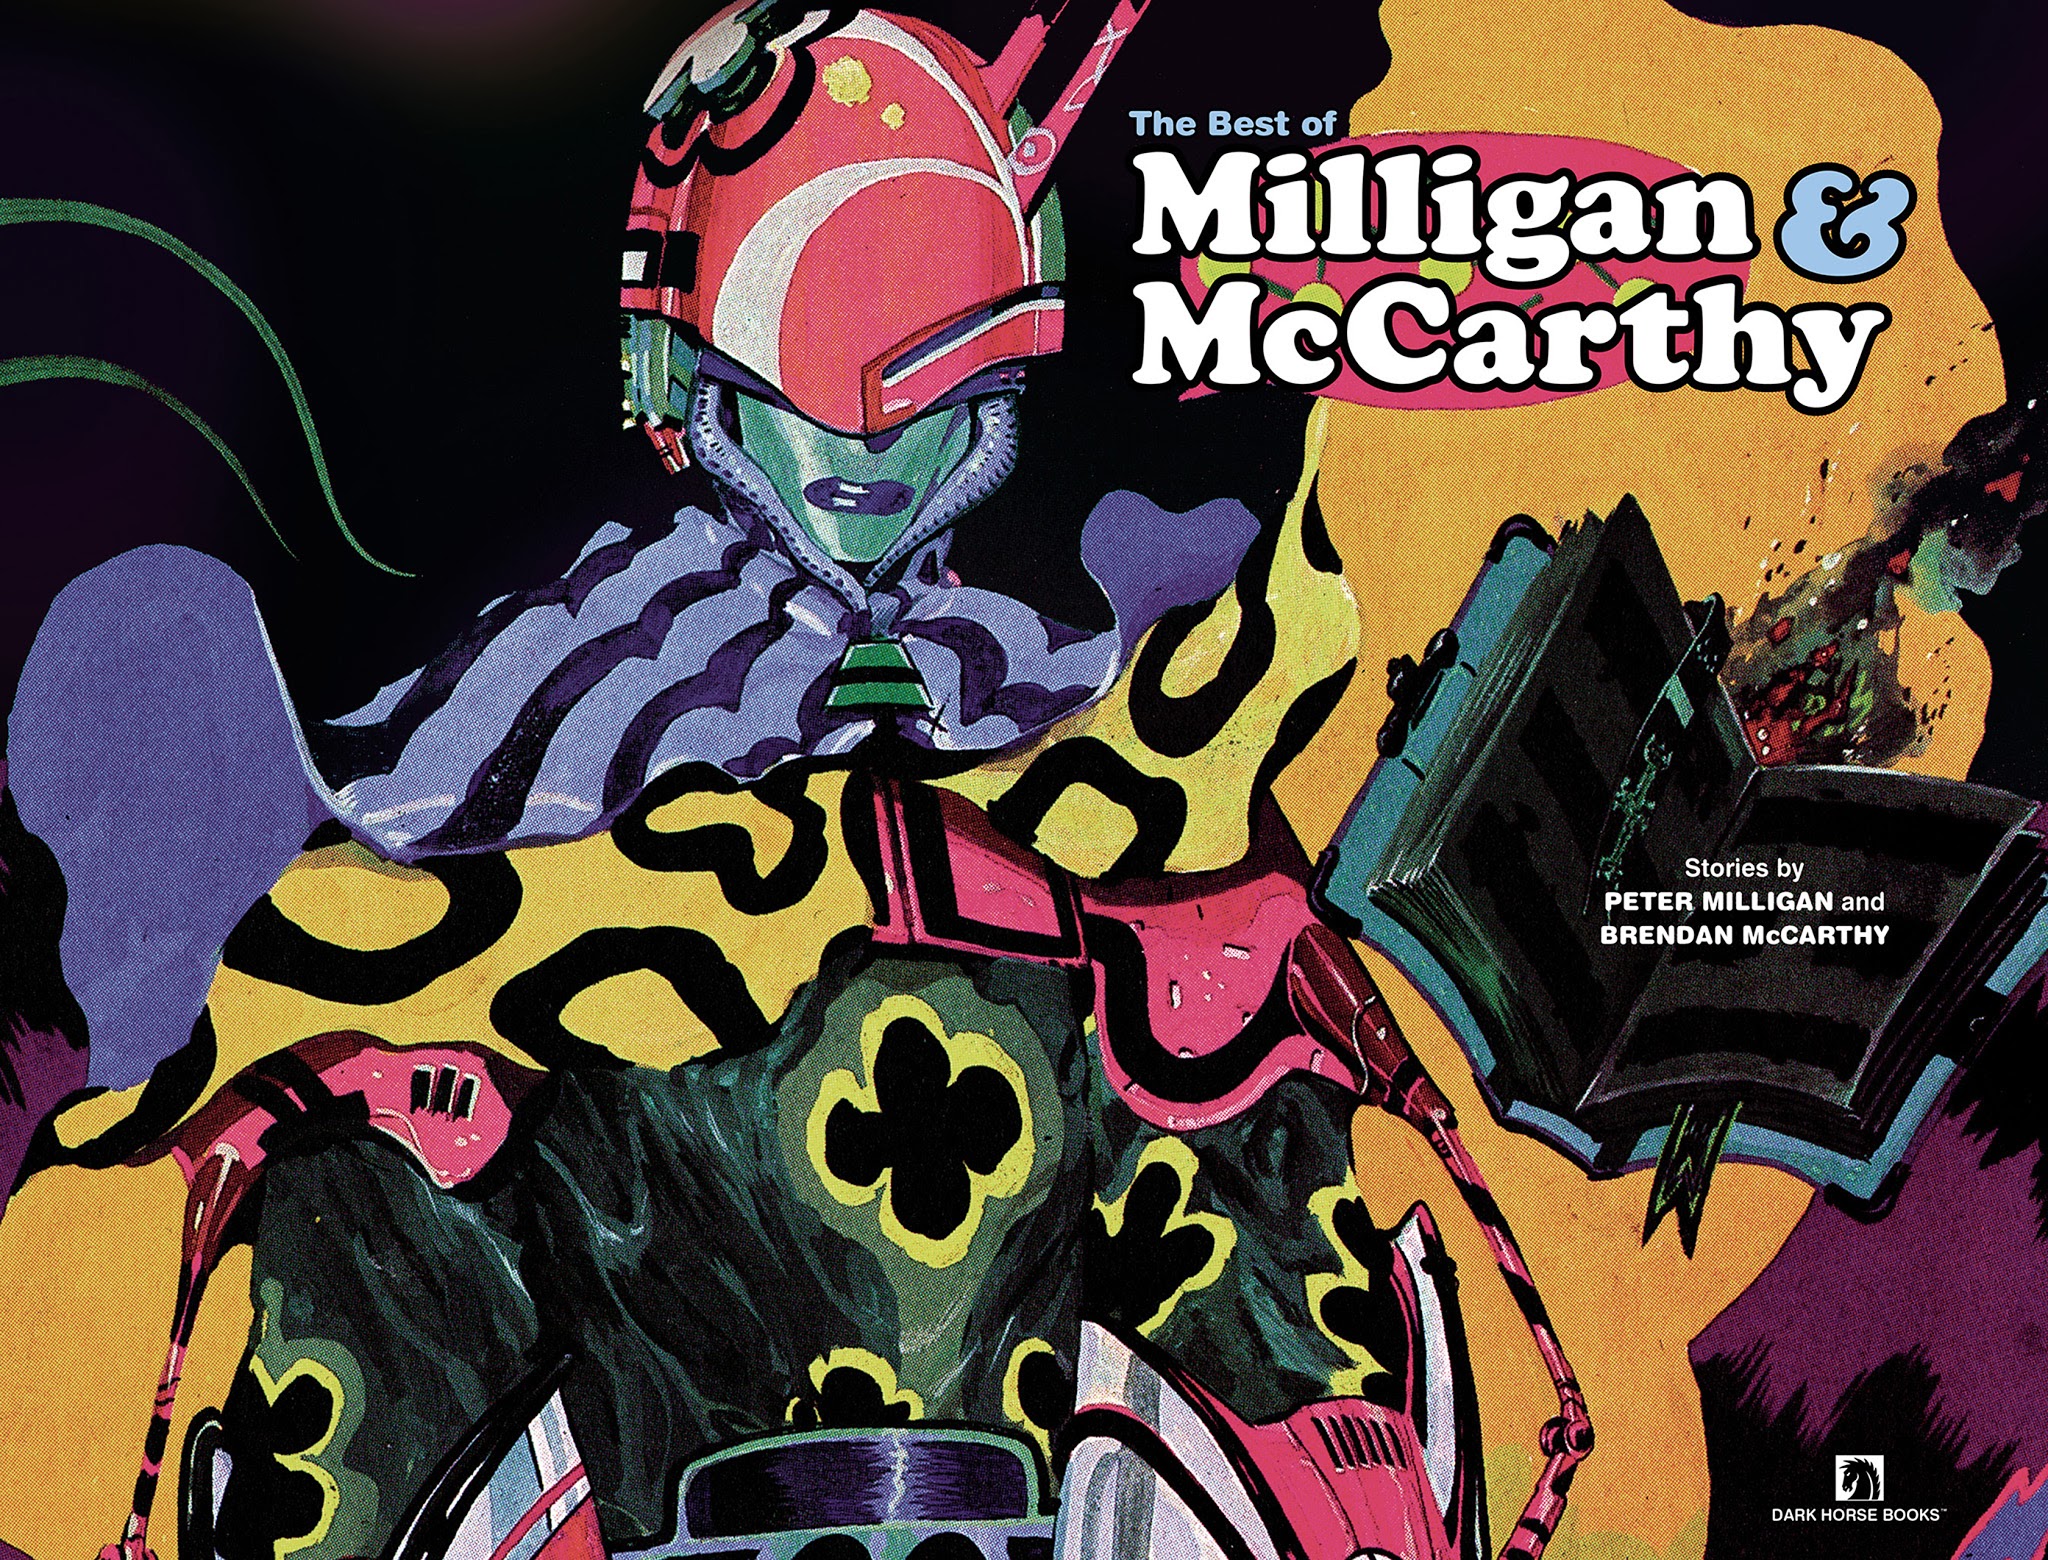 Read online The Best of Milligan & McCarthy comic -  Issue # TPB - 6